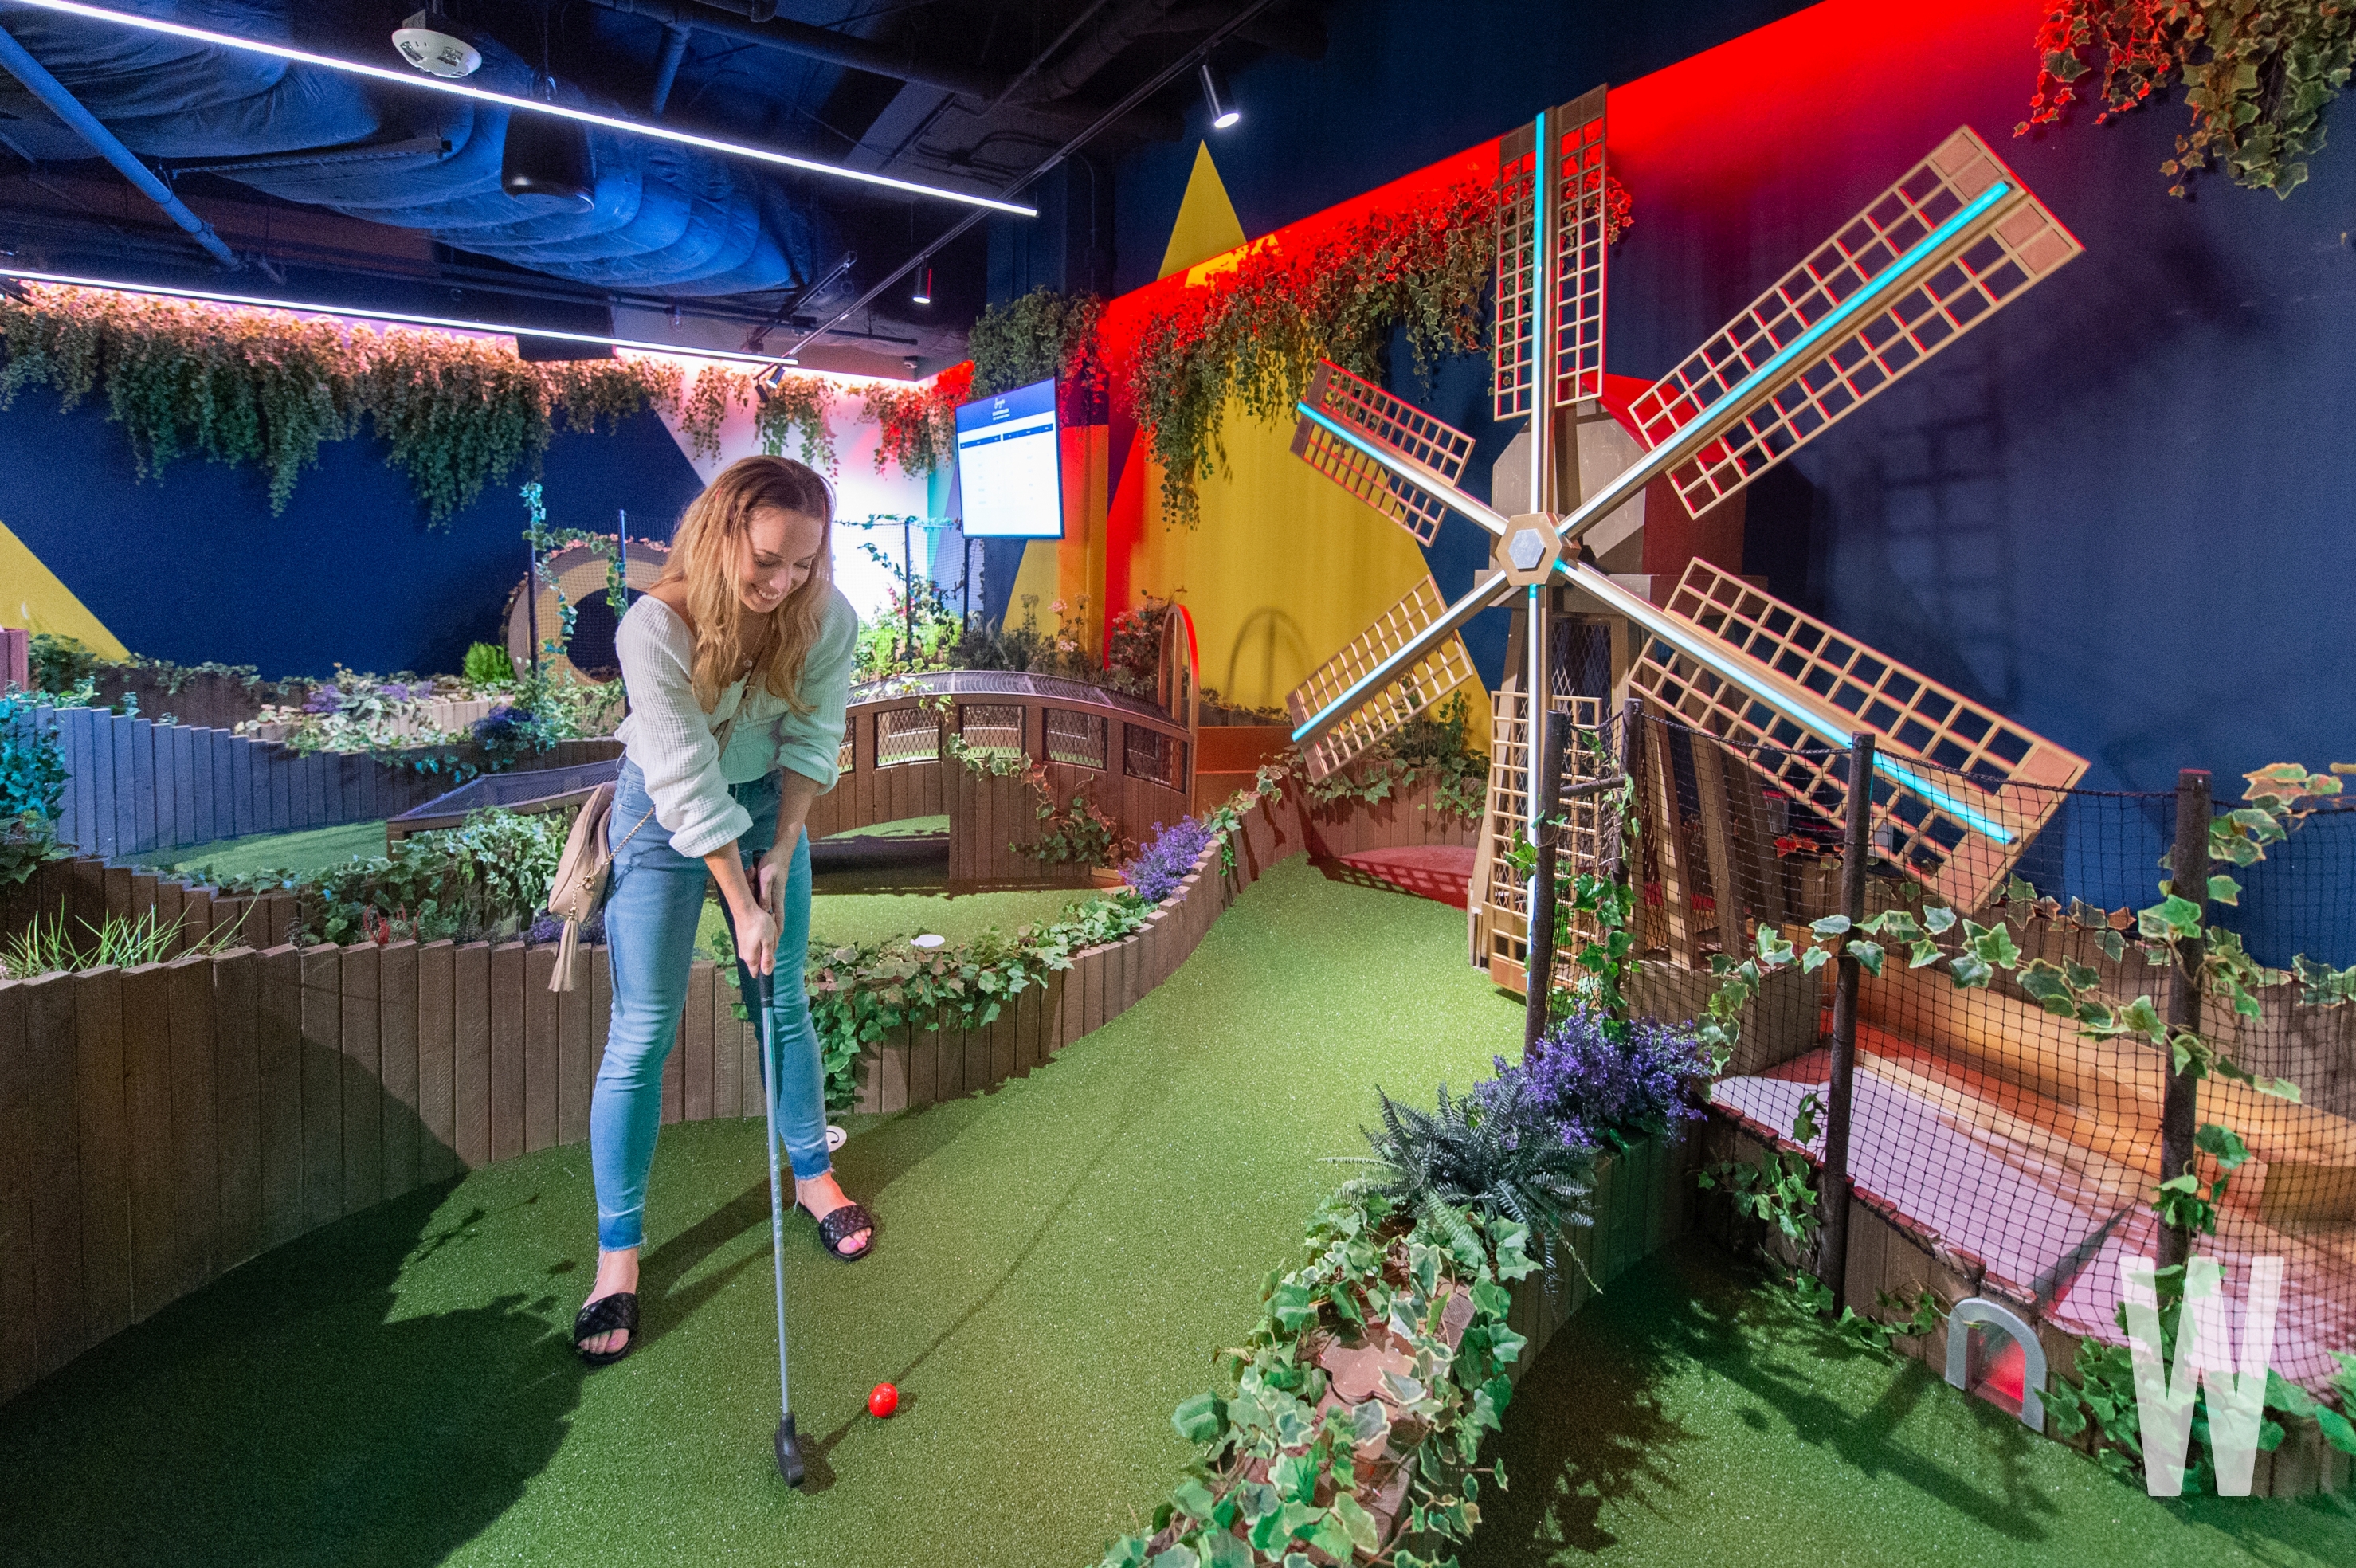 Swingers Crazy Golf Opening Party